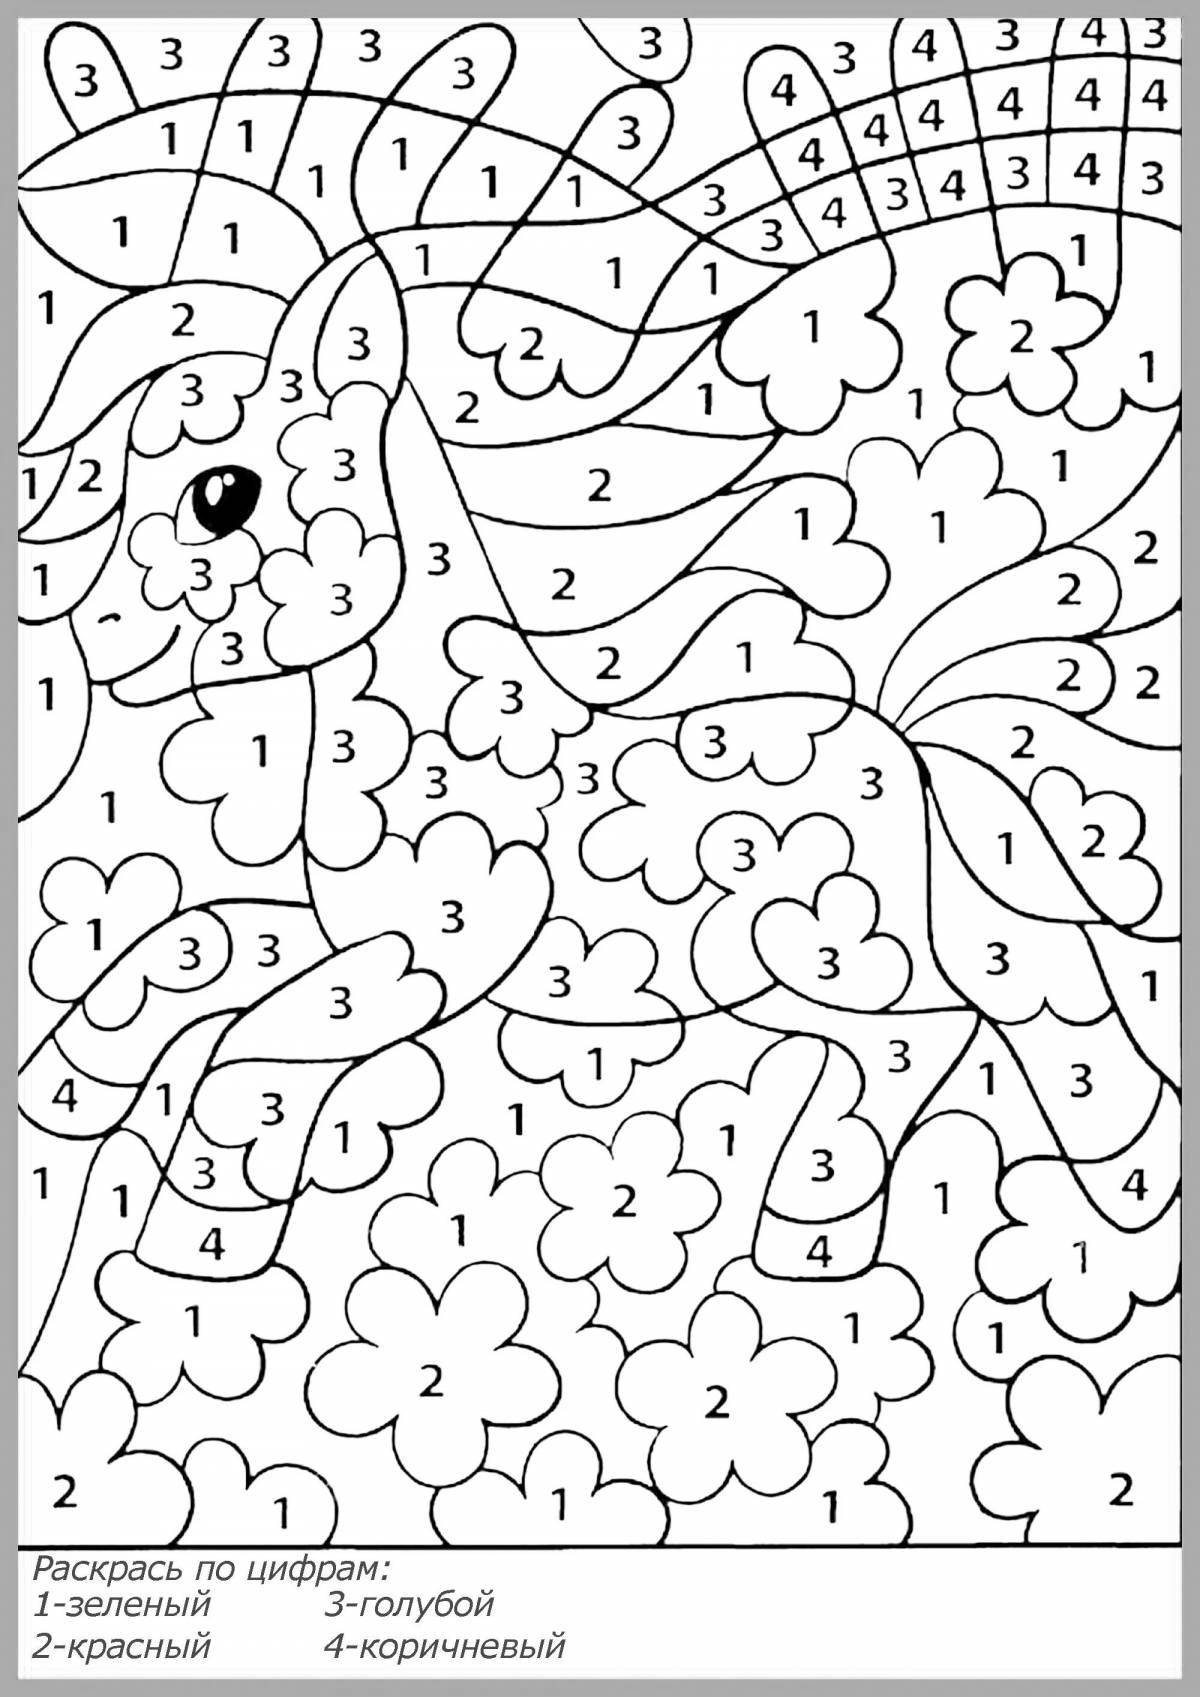 Fun coloring game with numbers